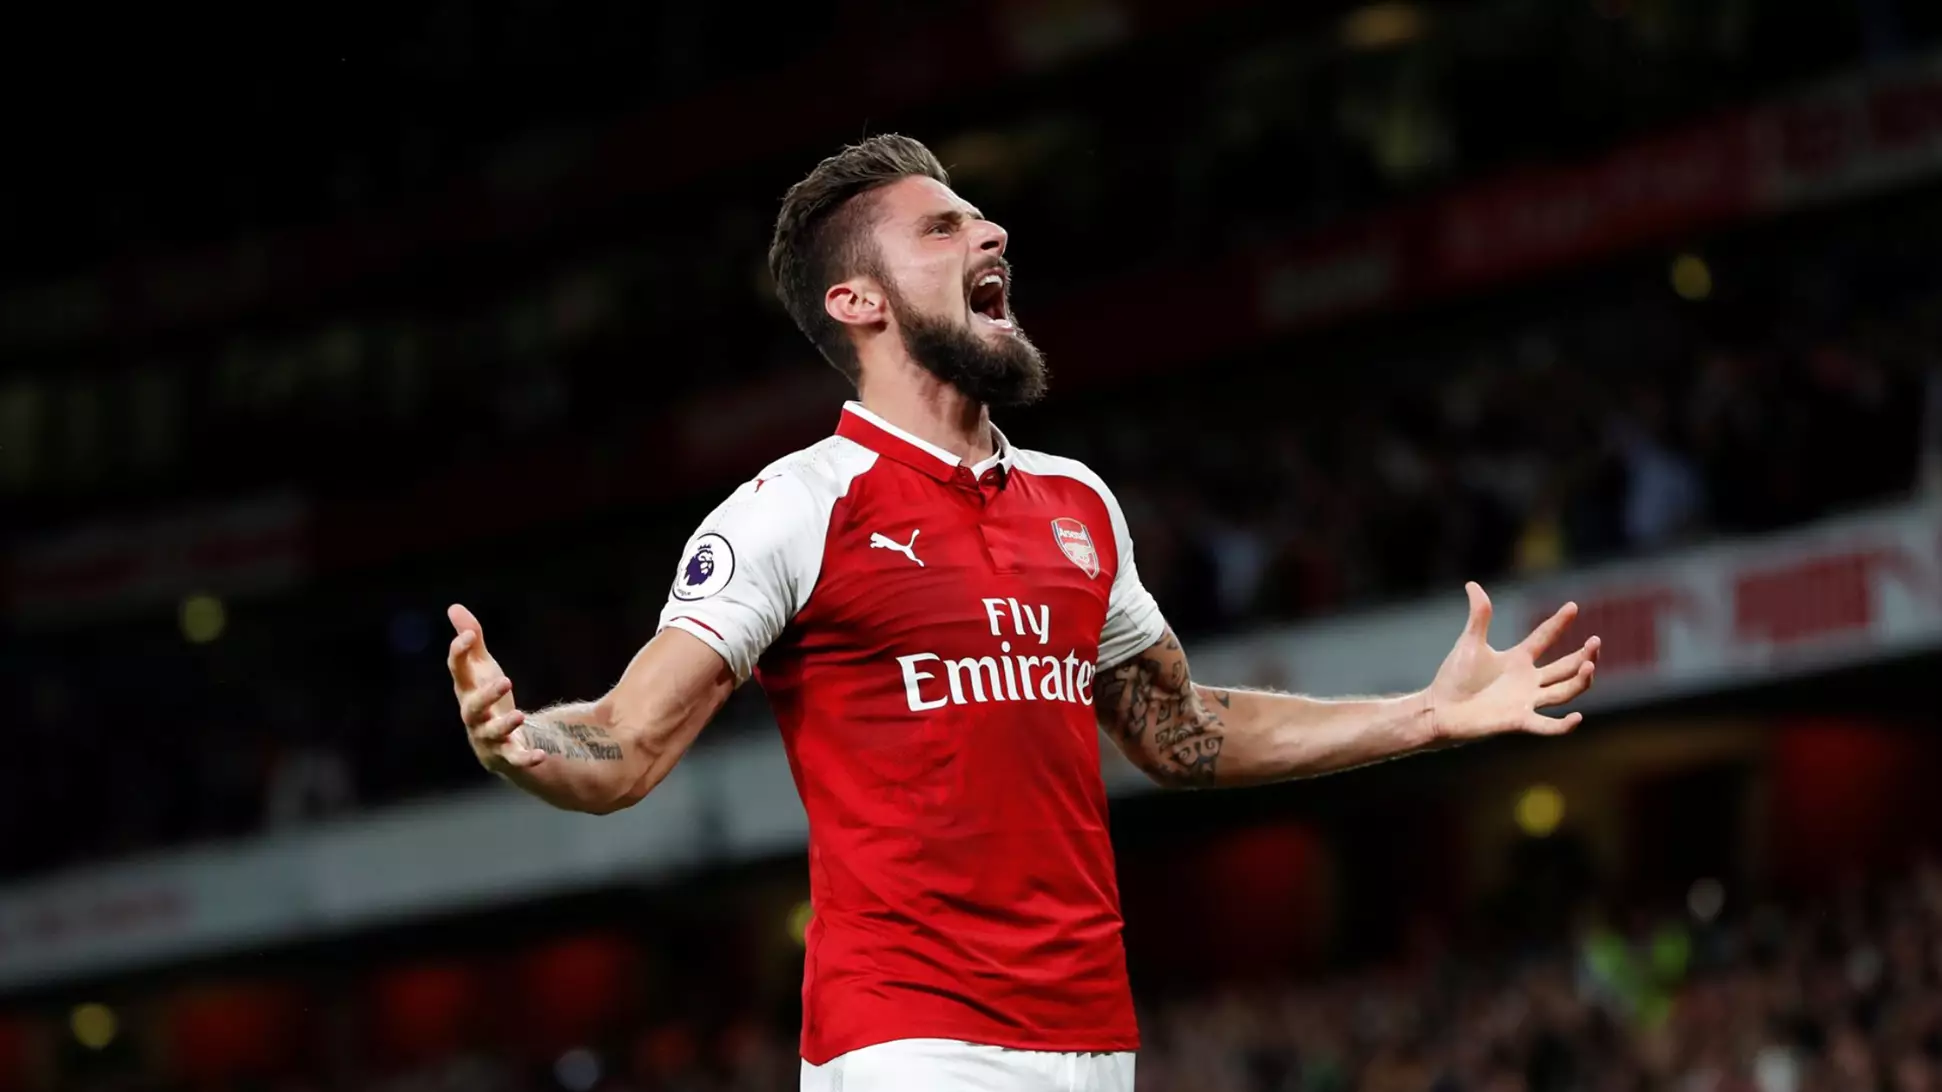 Arsenal 4-3 Leicester - The Premier League Is Well And Truly Back